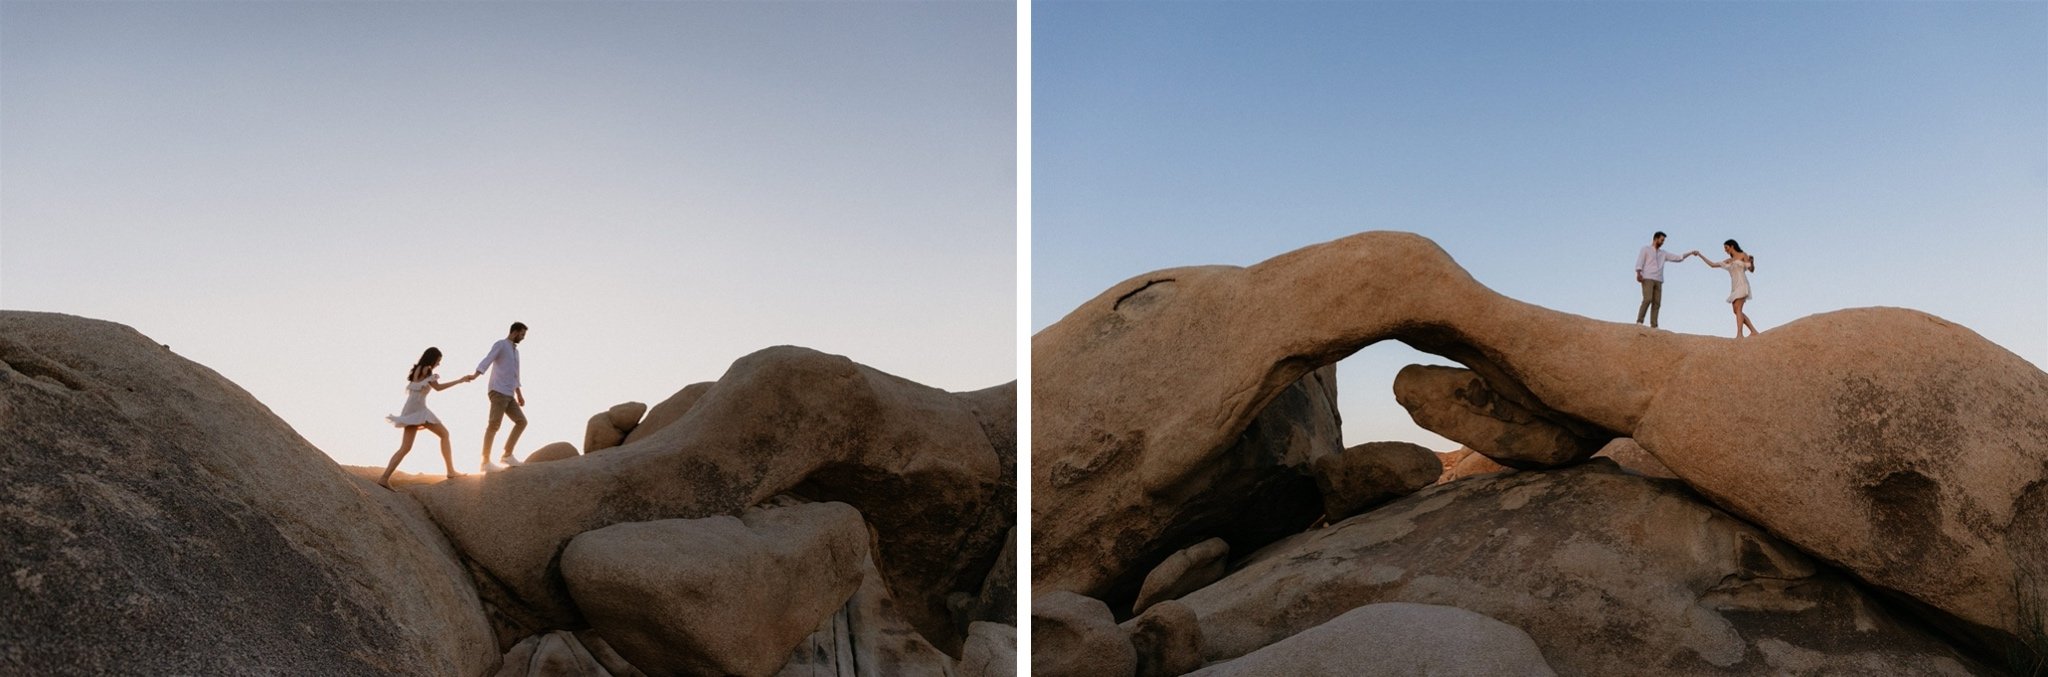 Joshua Tree Couples Session Surprise Proposal - Will Khoury Photography_37.jpg